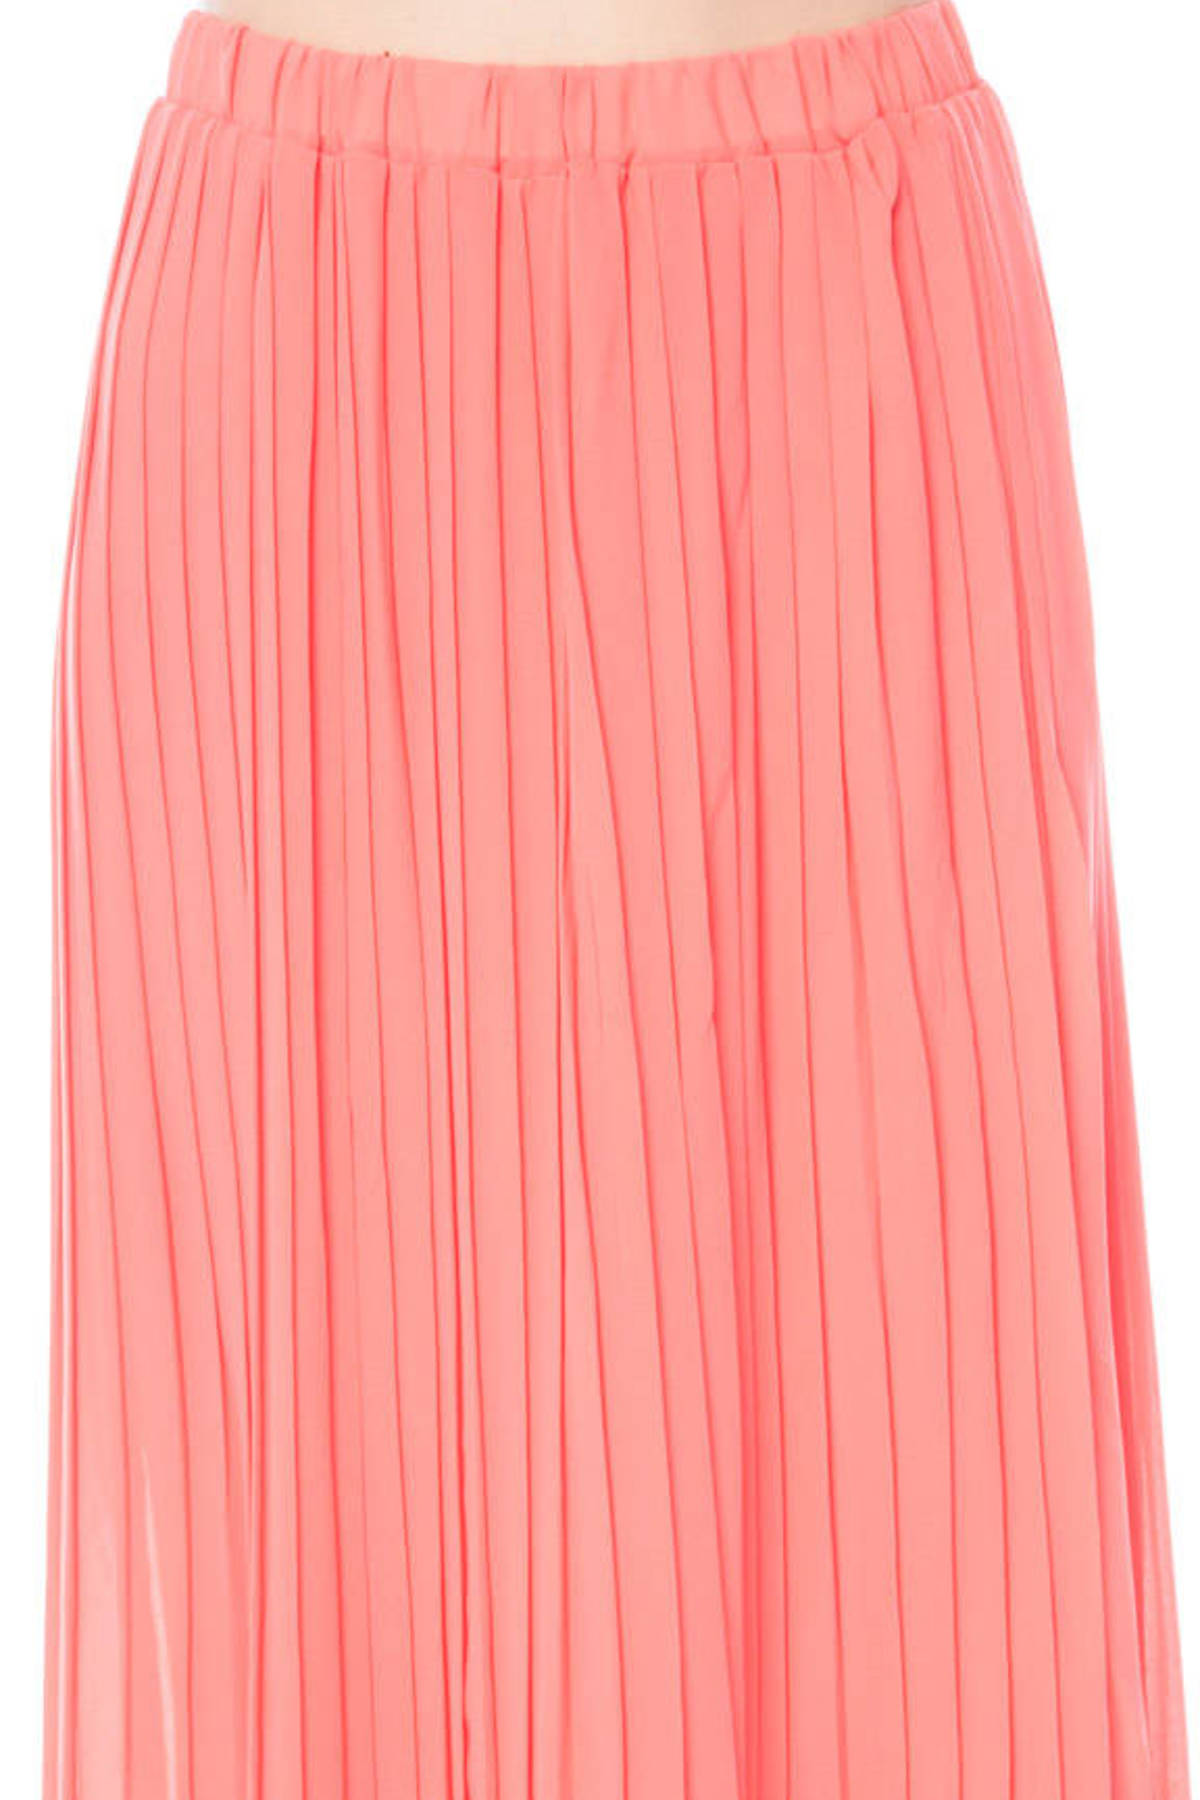 Long Pleated Chiffon Skirt in Coral - $13 | Tobi US